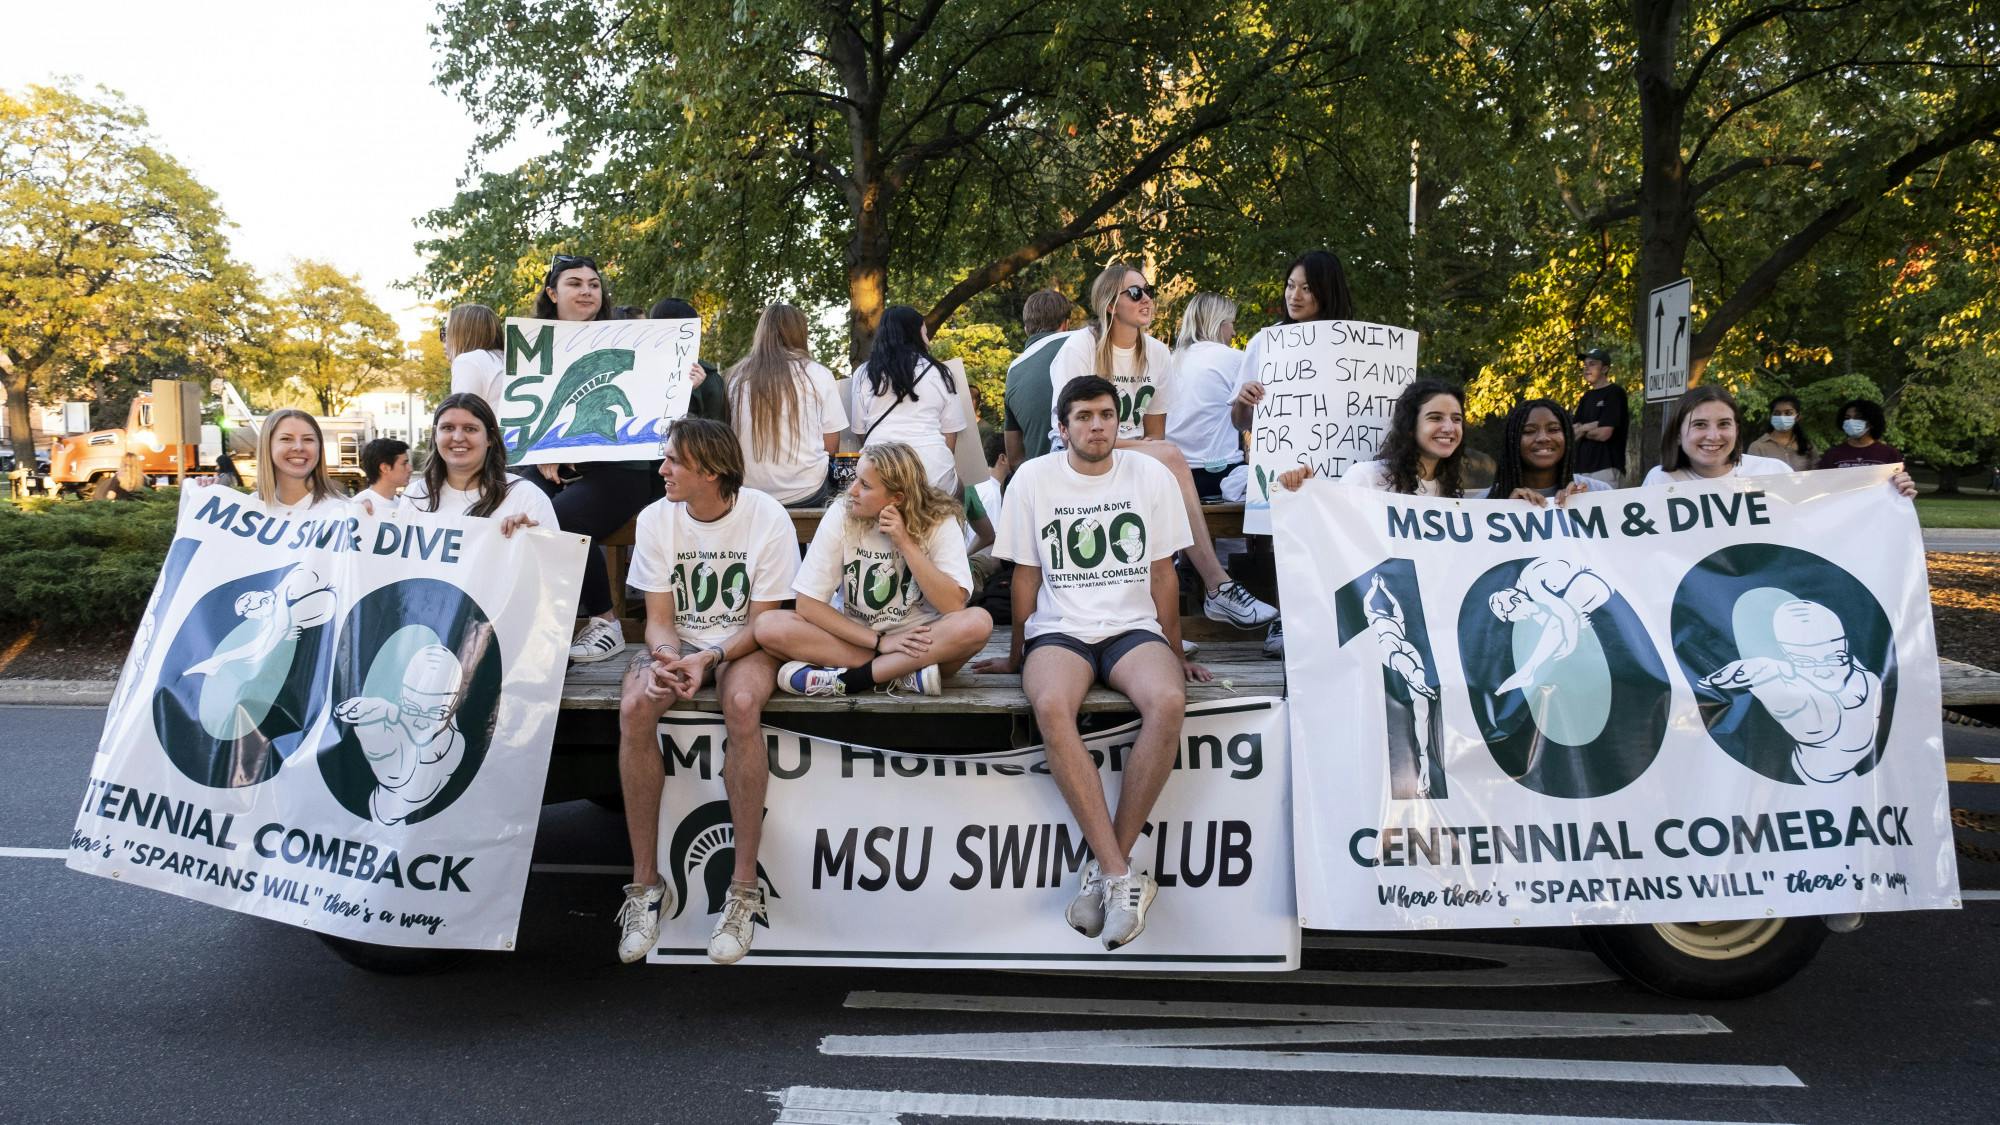 The MSU Swim Club float to save the MSU Swim and Dive Team in the MSU Homecoming parade on October 1, 2021 on Farm Lane in East Lansing. 